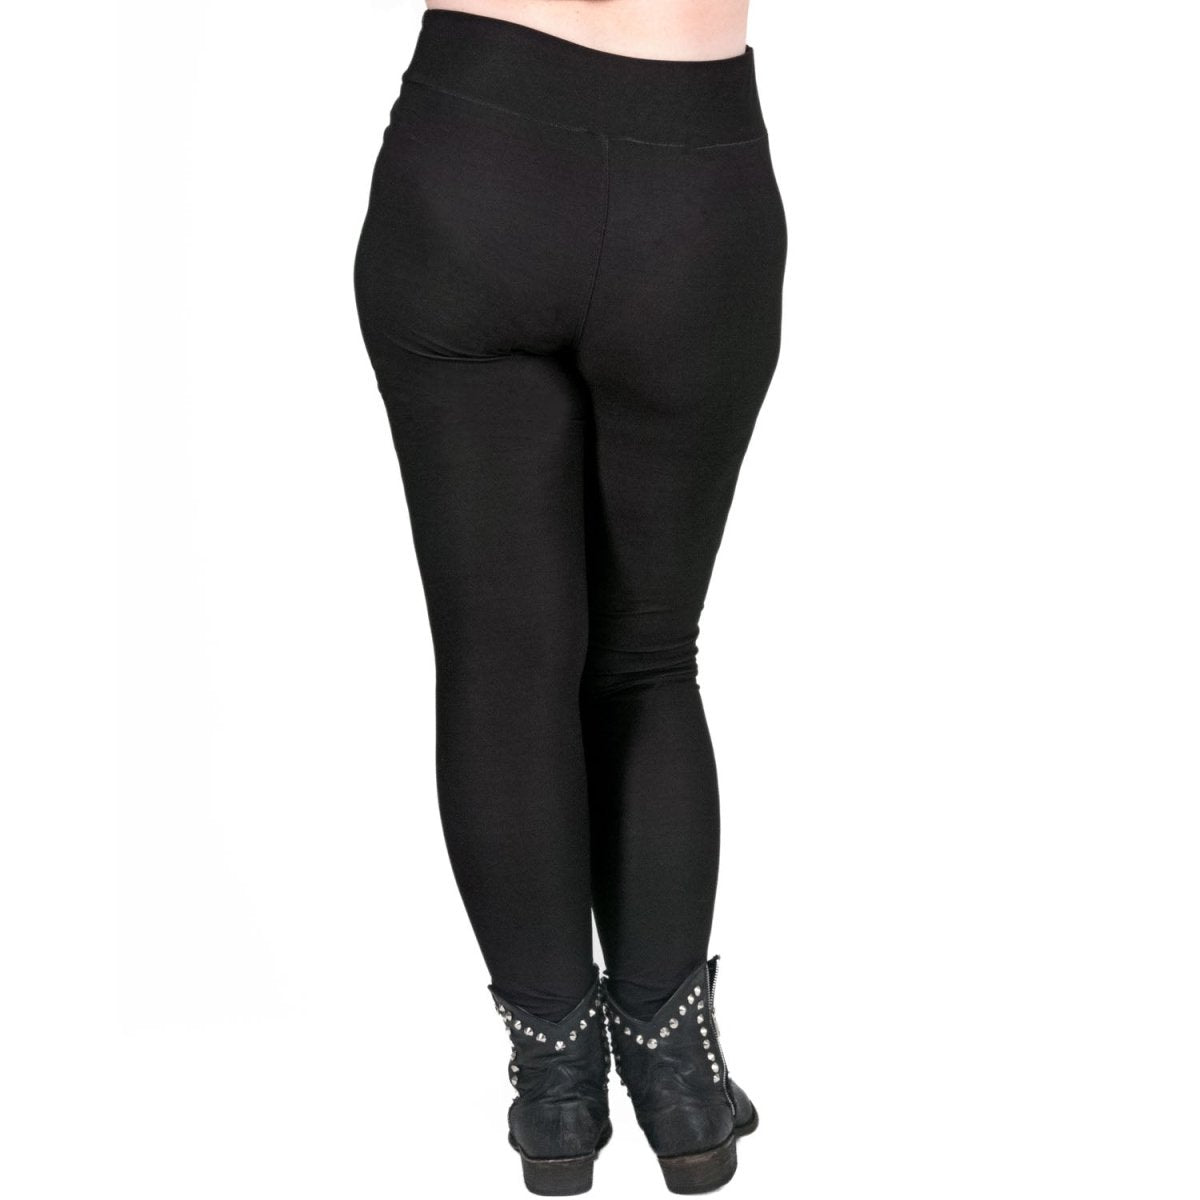 Your Go to Leggings 2.0, Black, X-Small : Buy Online at Best Price in KSA -  Souq is now : Fashion